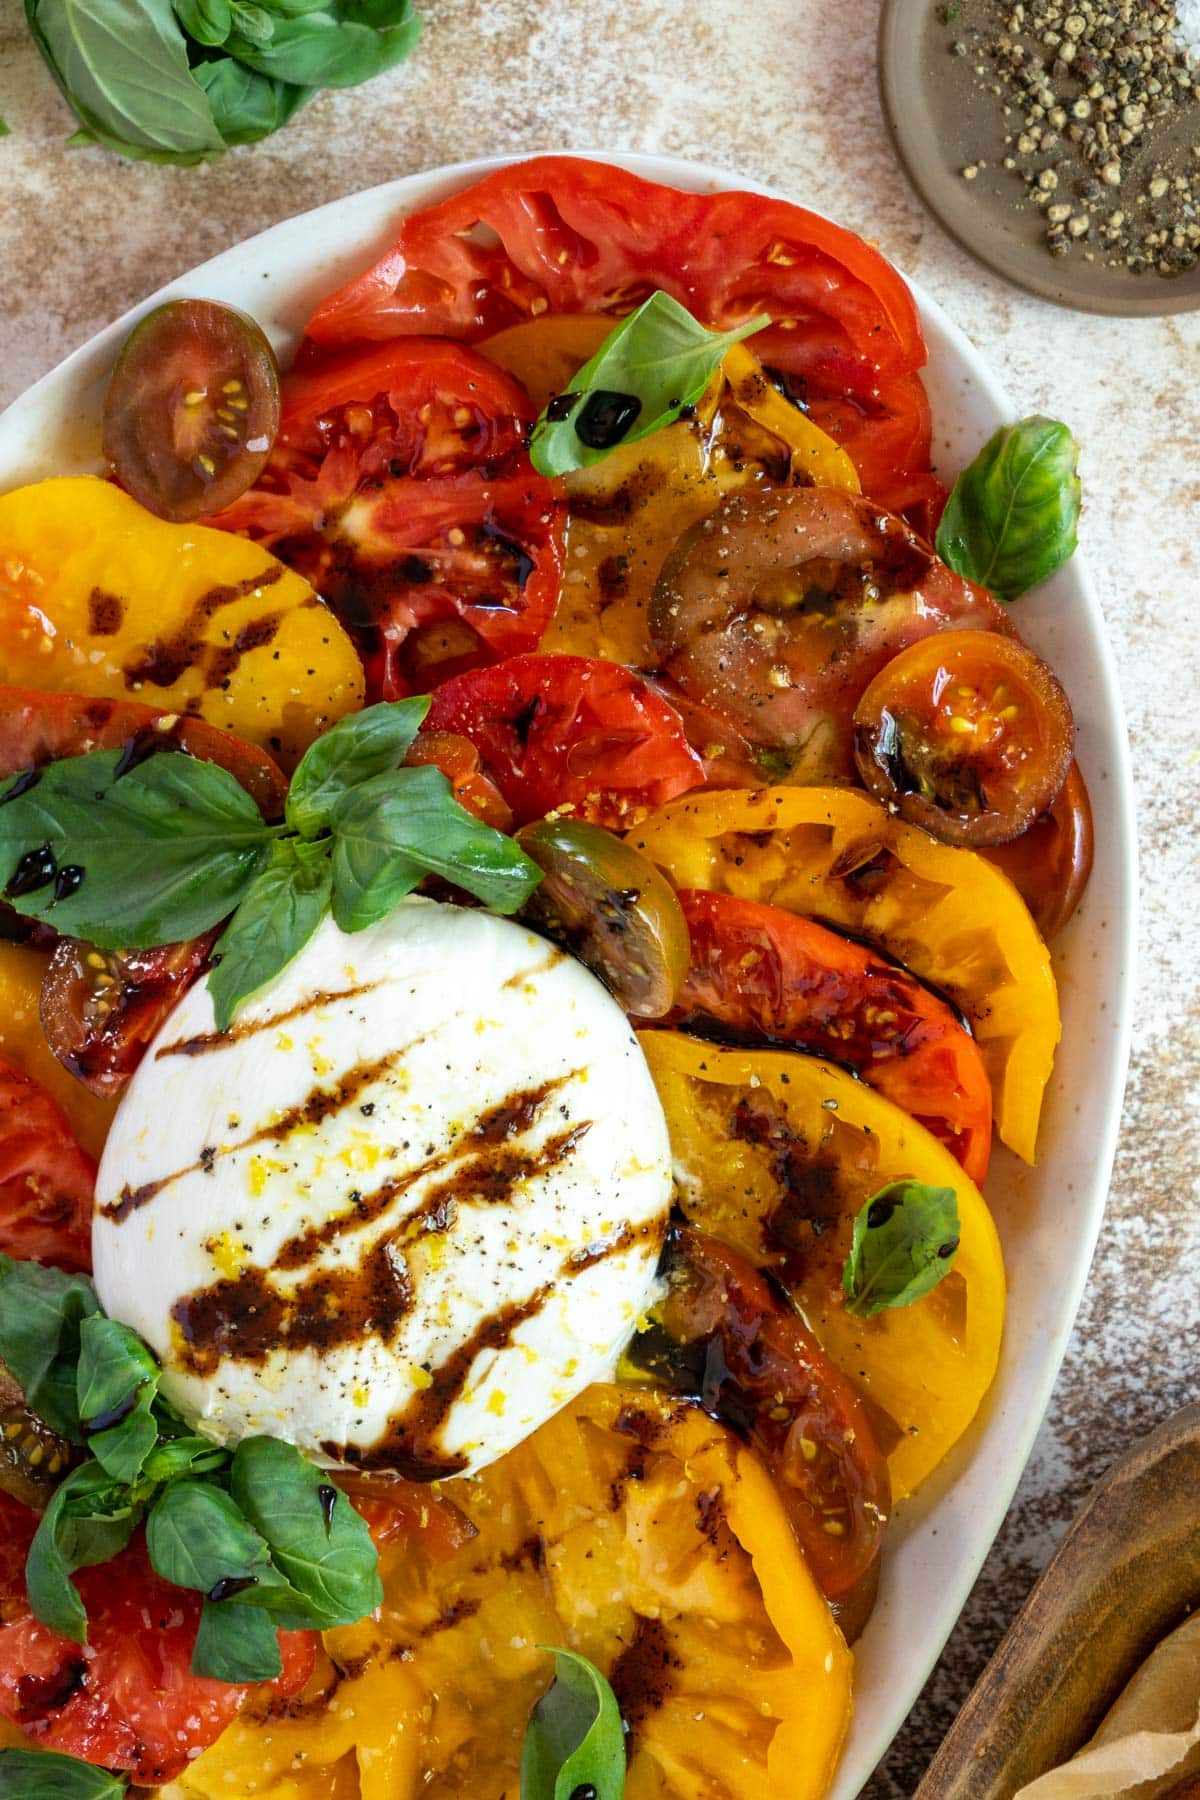 Burrata with tomatoes and balsamic.